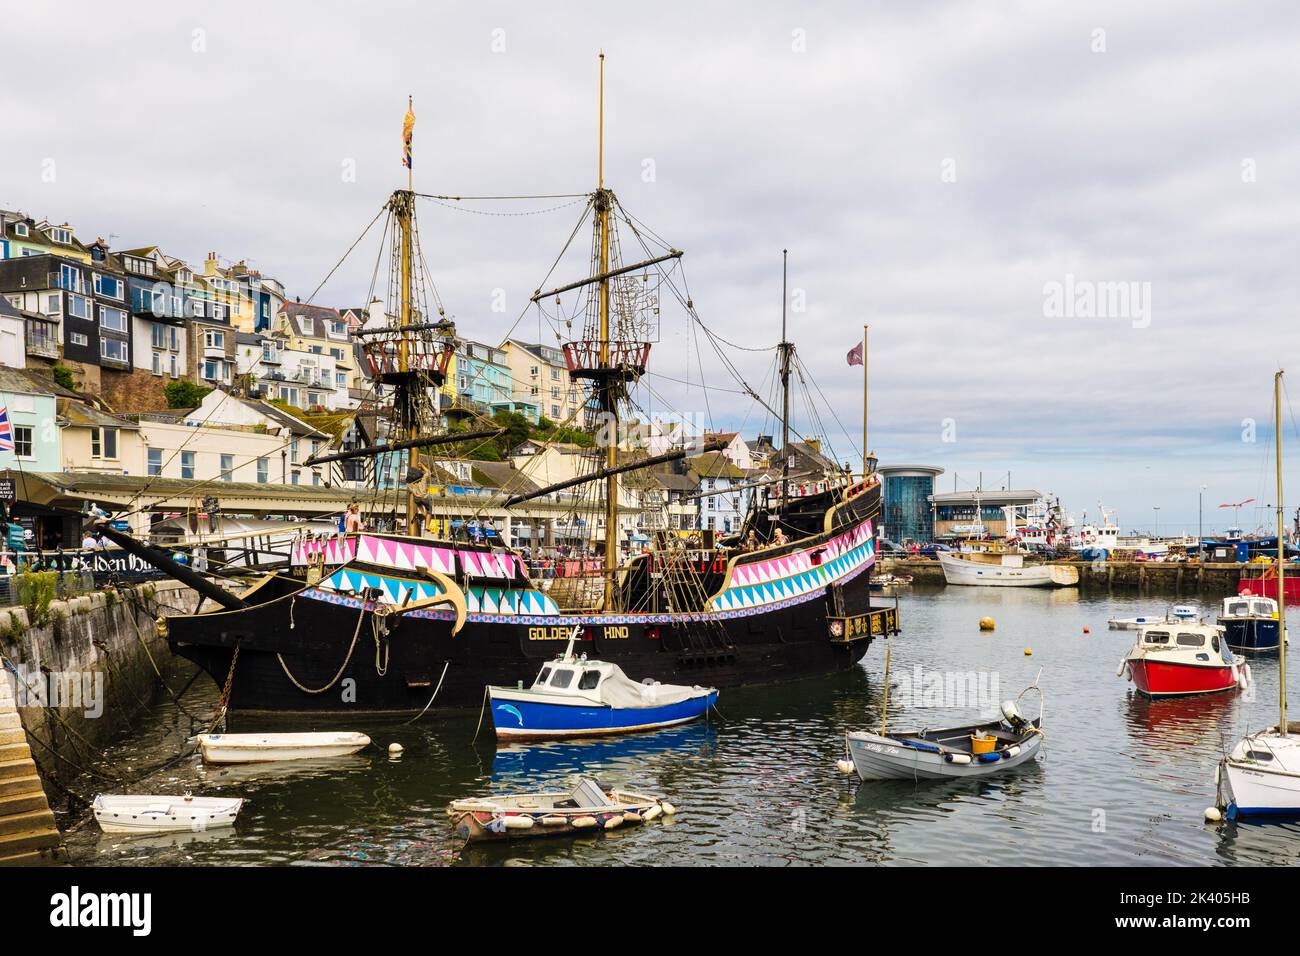 Replica of the Golden Hind galleon with small boats moored in the inner harbour. Brixham, Devon, England, UK, Britain Stock Photo